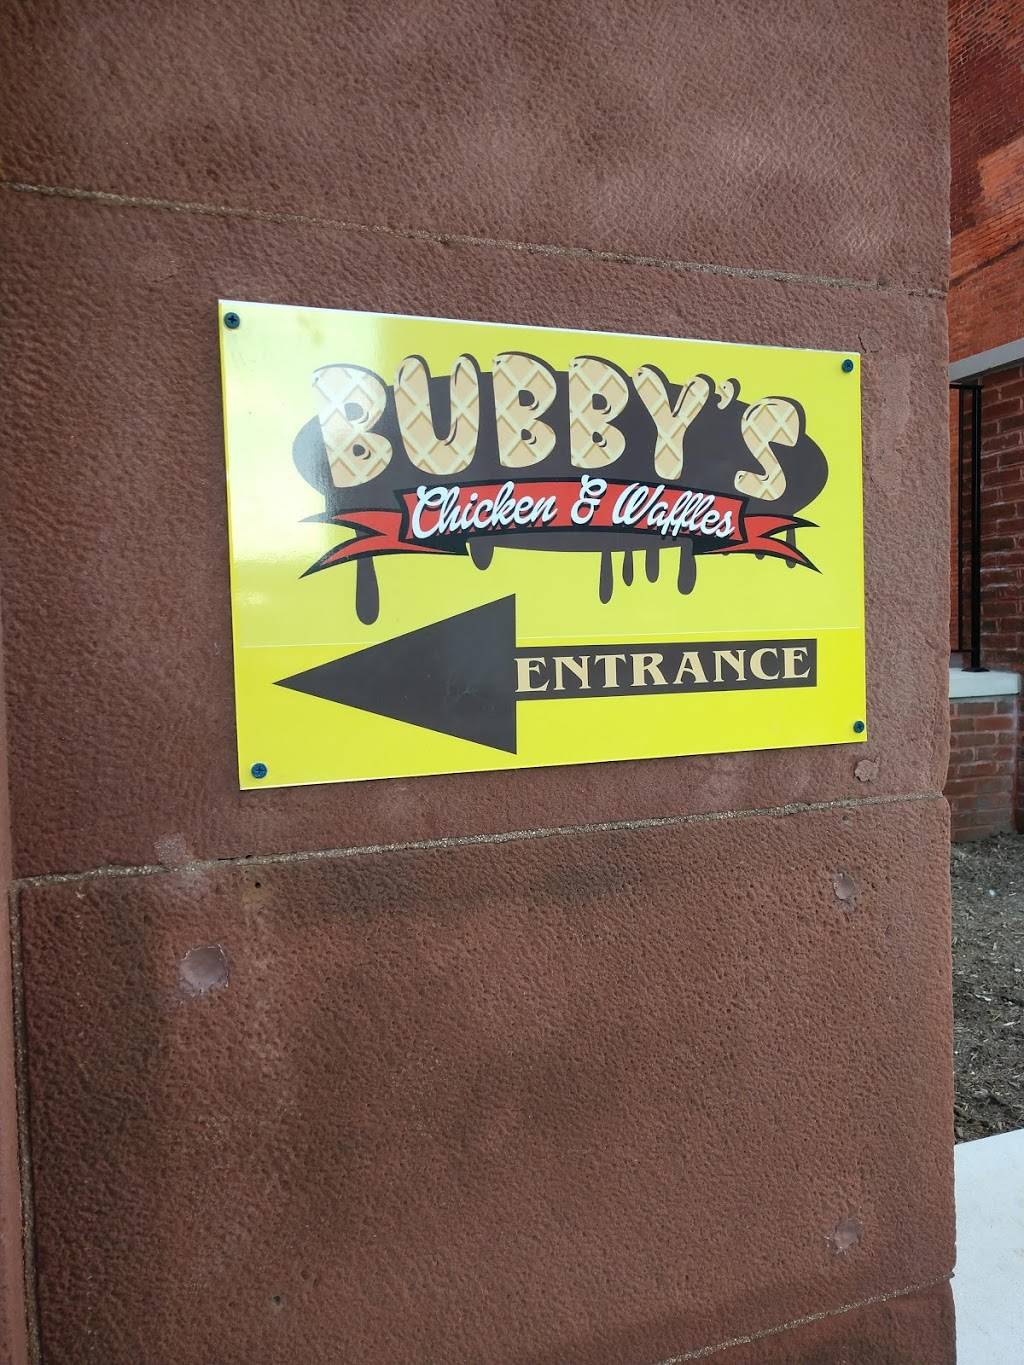 Bubbys Chicken & Waffles | restaurant | 16 N Fountain Ave, Springfield, OH 45502, USA | 9374505332 OR +1 937-450-5332